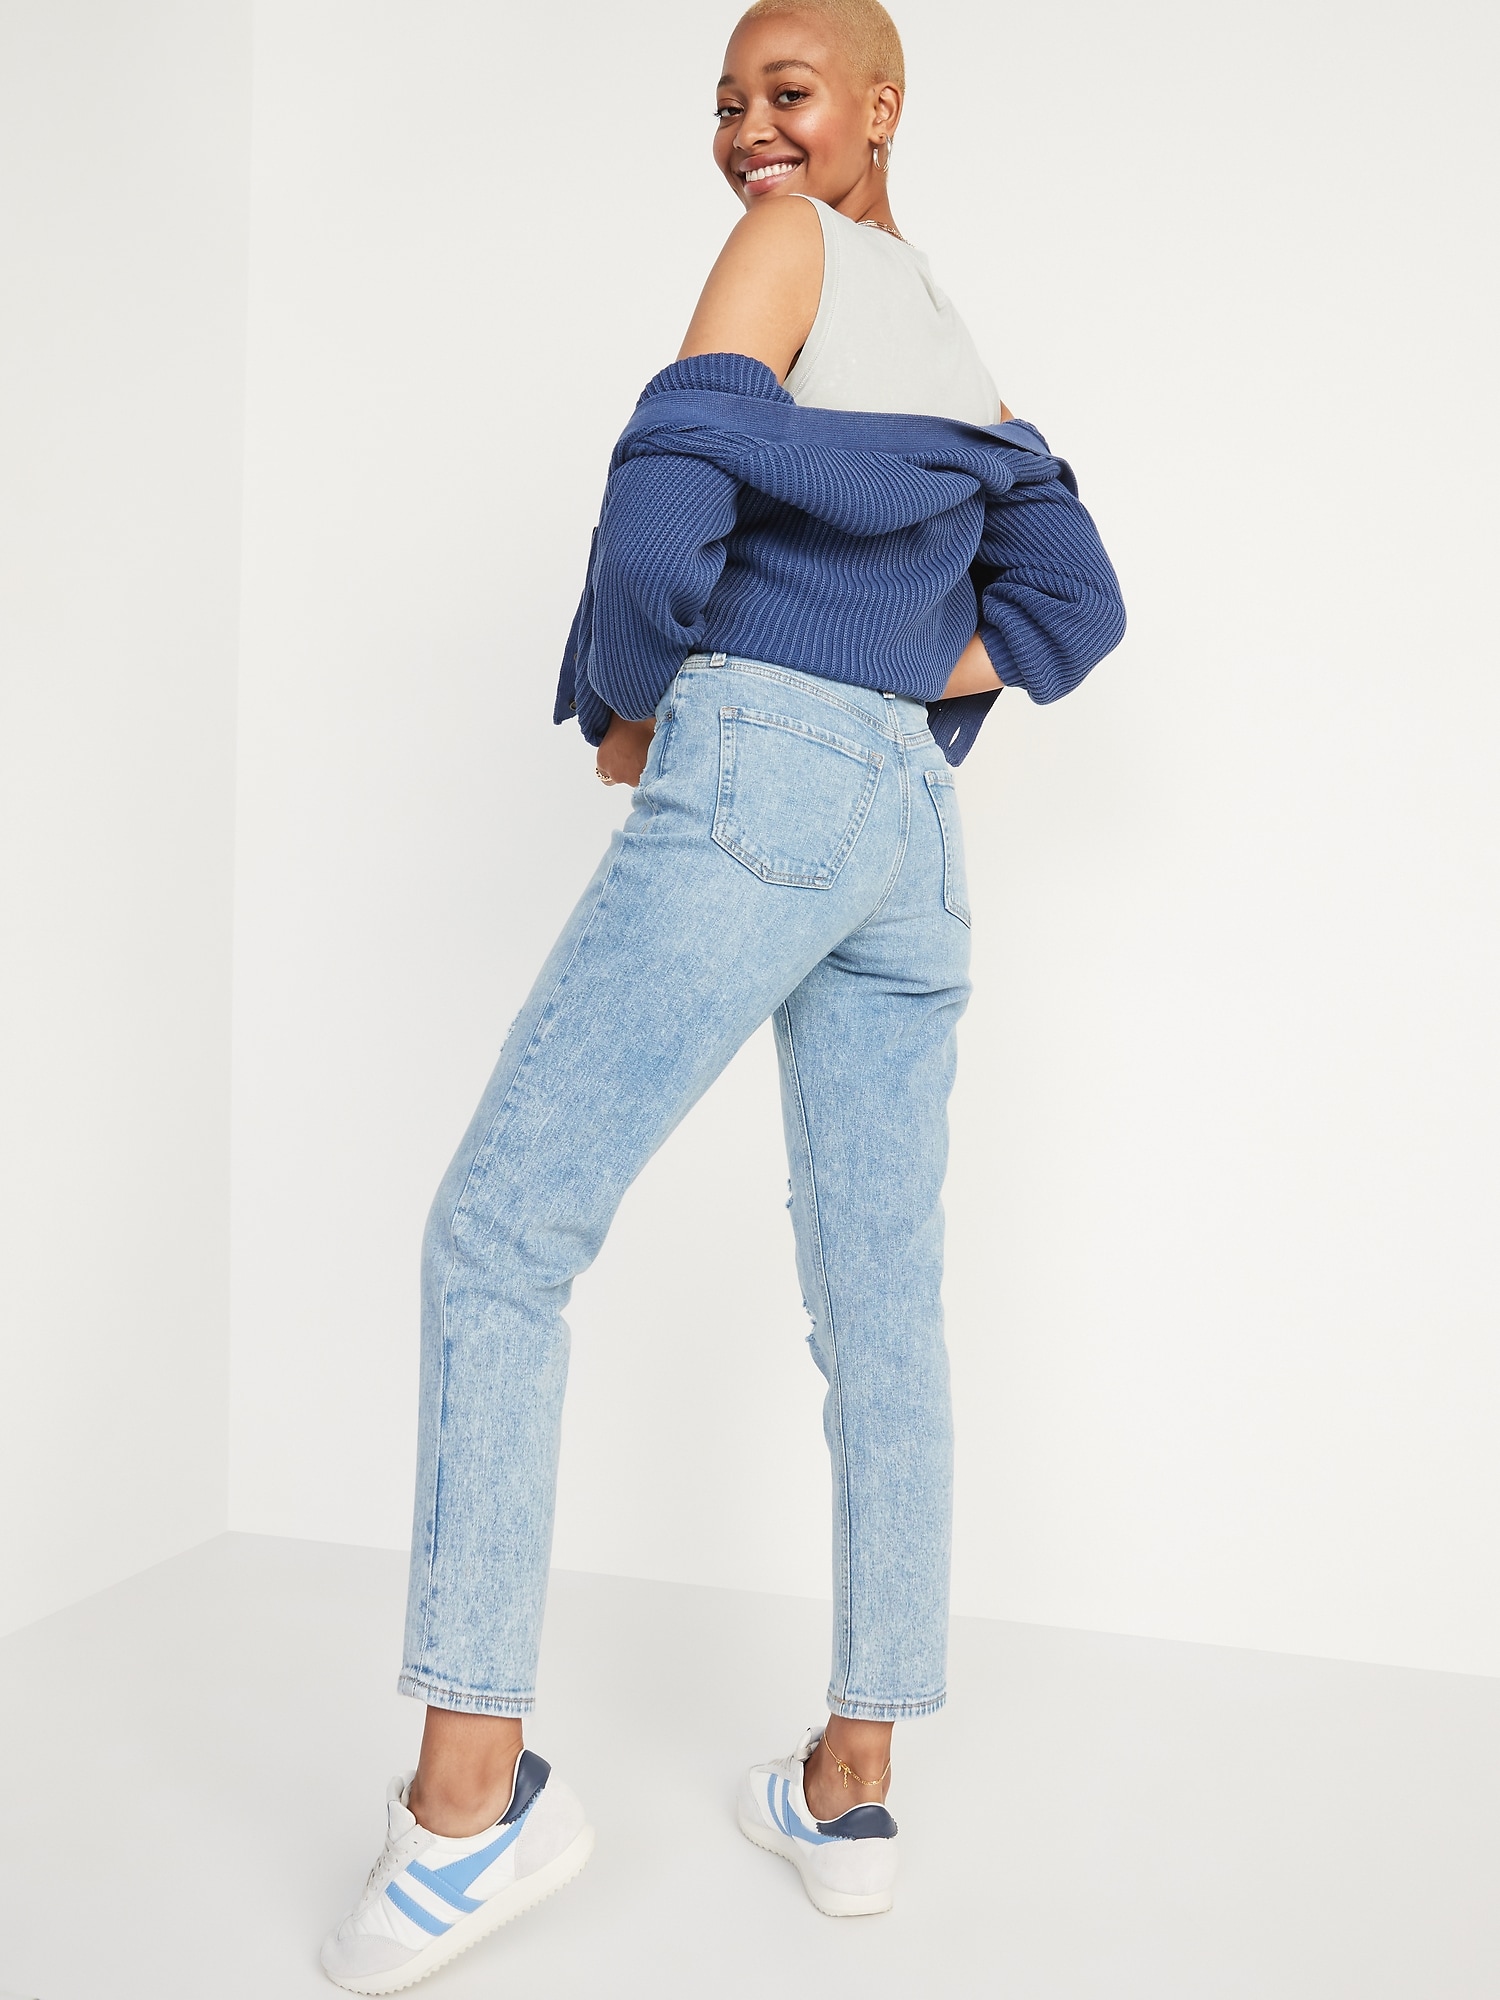 Curvy Extra High-Waisted Button-Fly Sky-Hi Straight Jeans for